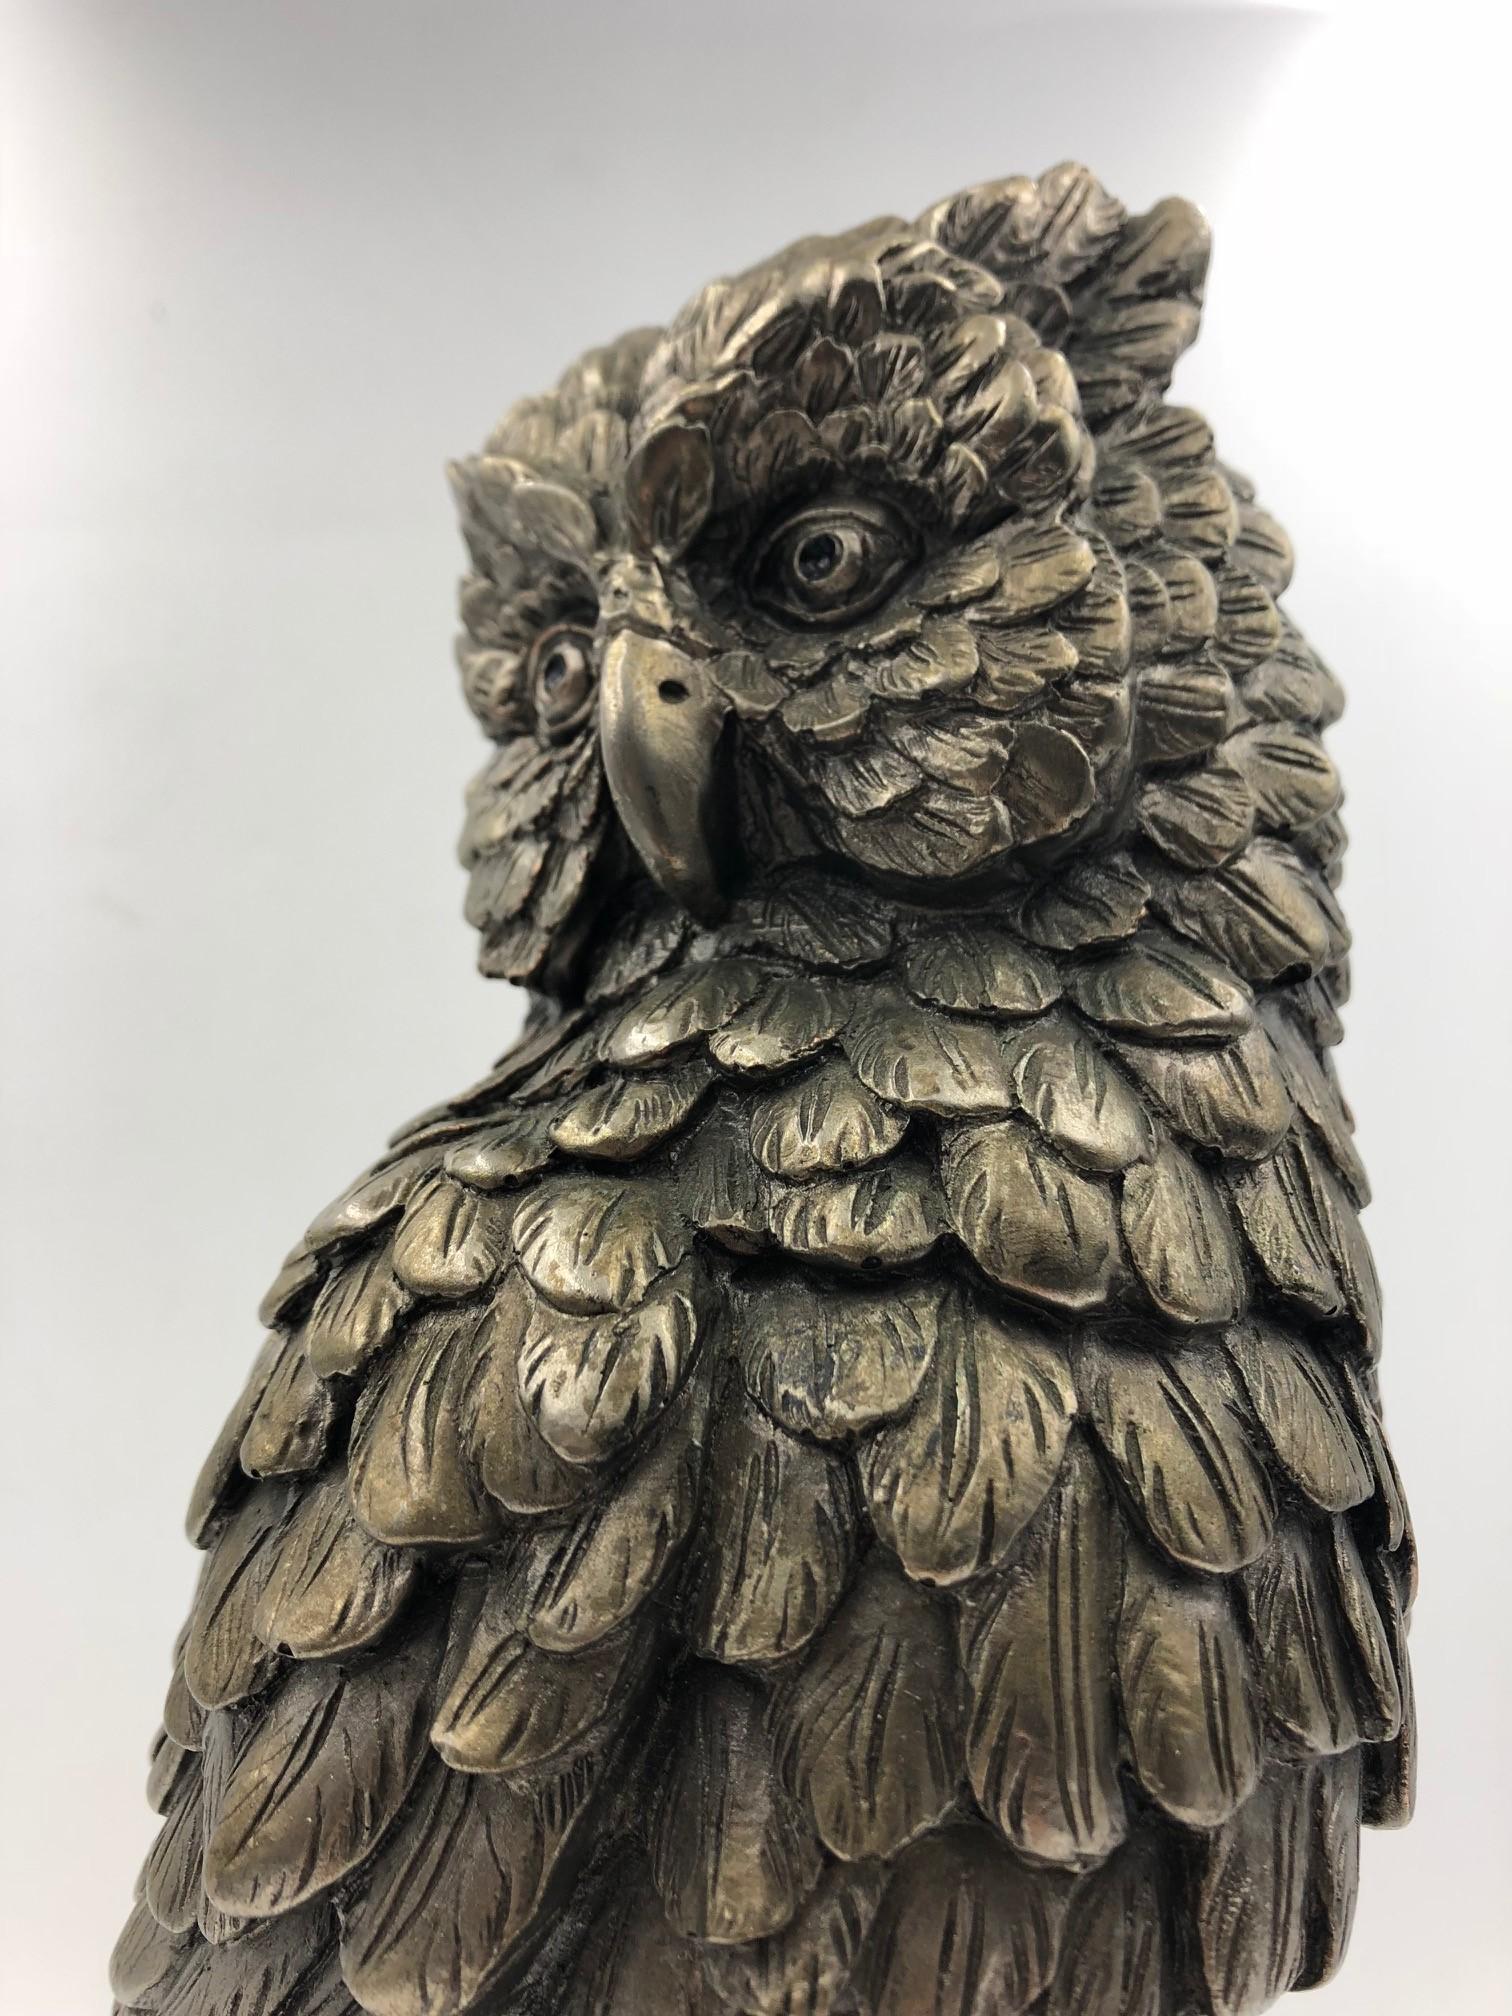 Finest example of a figural owl sculpture, made of brass and silvered, impressive one stands 33 cm tall and features a beautifully cast owl sitting on a branch.

The making of appears to be in Germany, maybe by the company WMF, which made some of